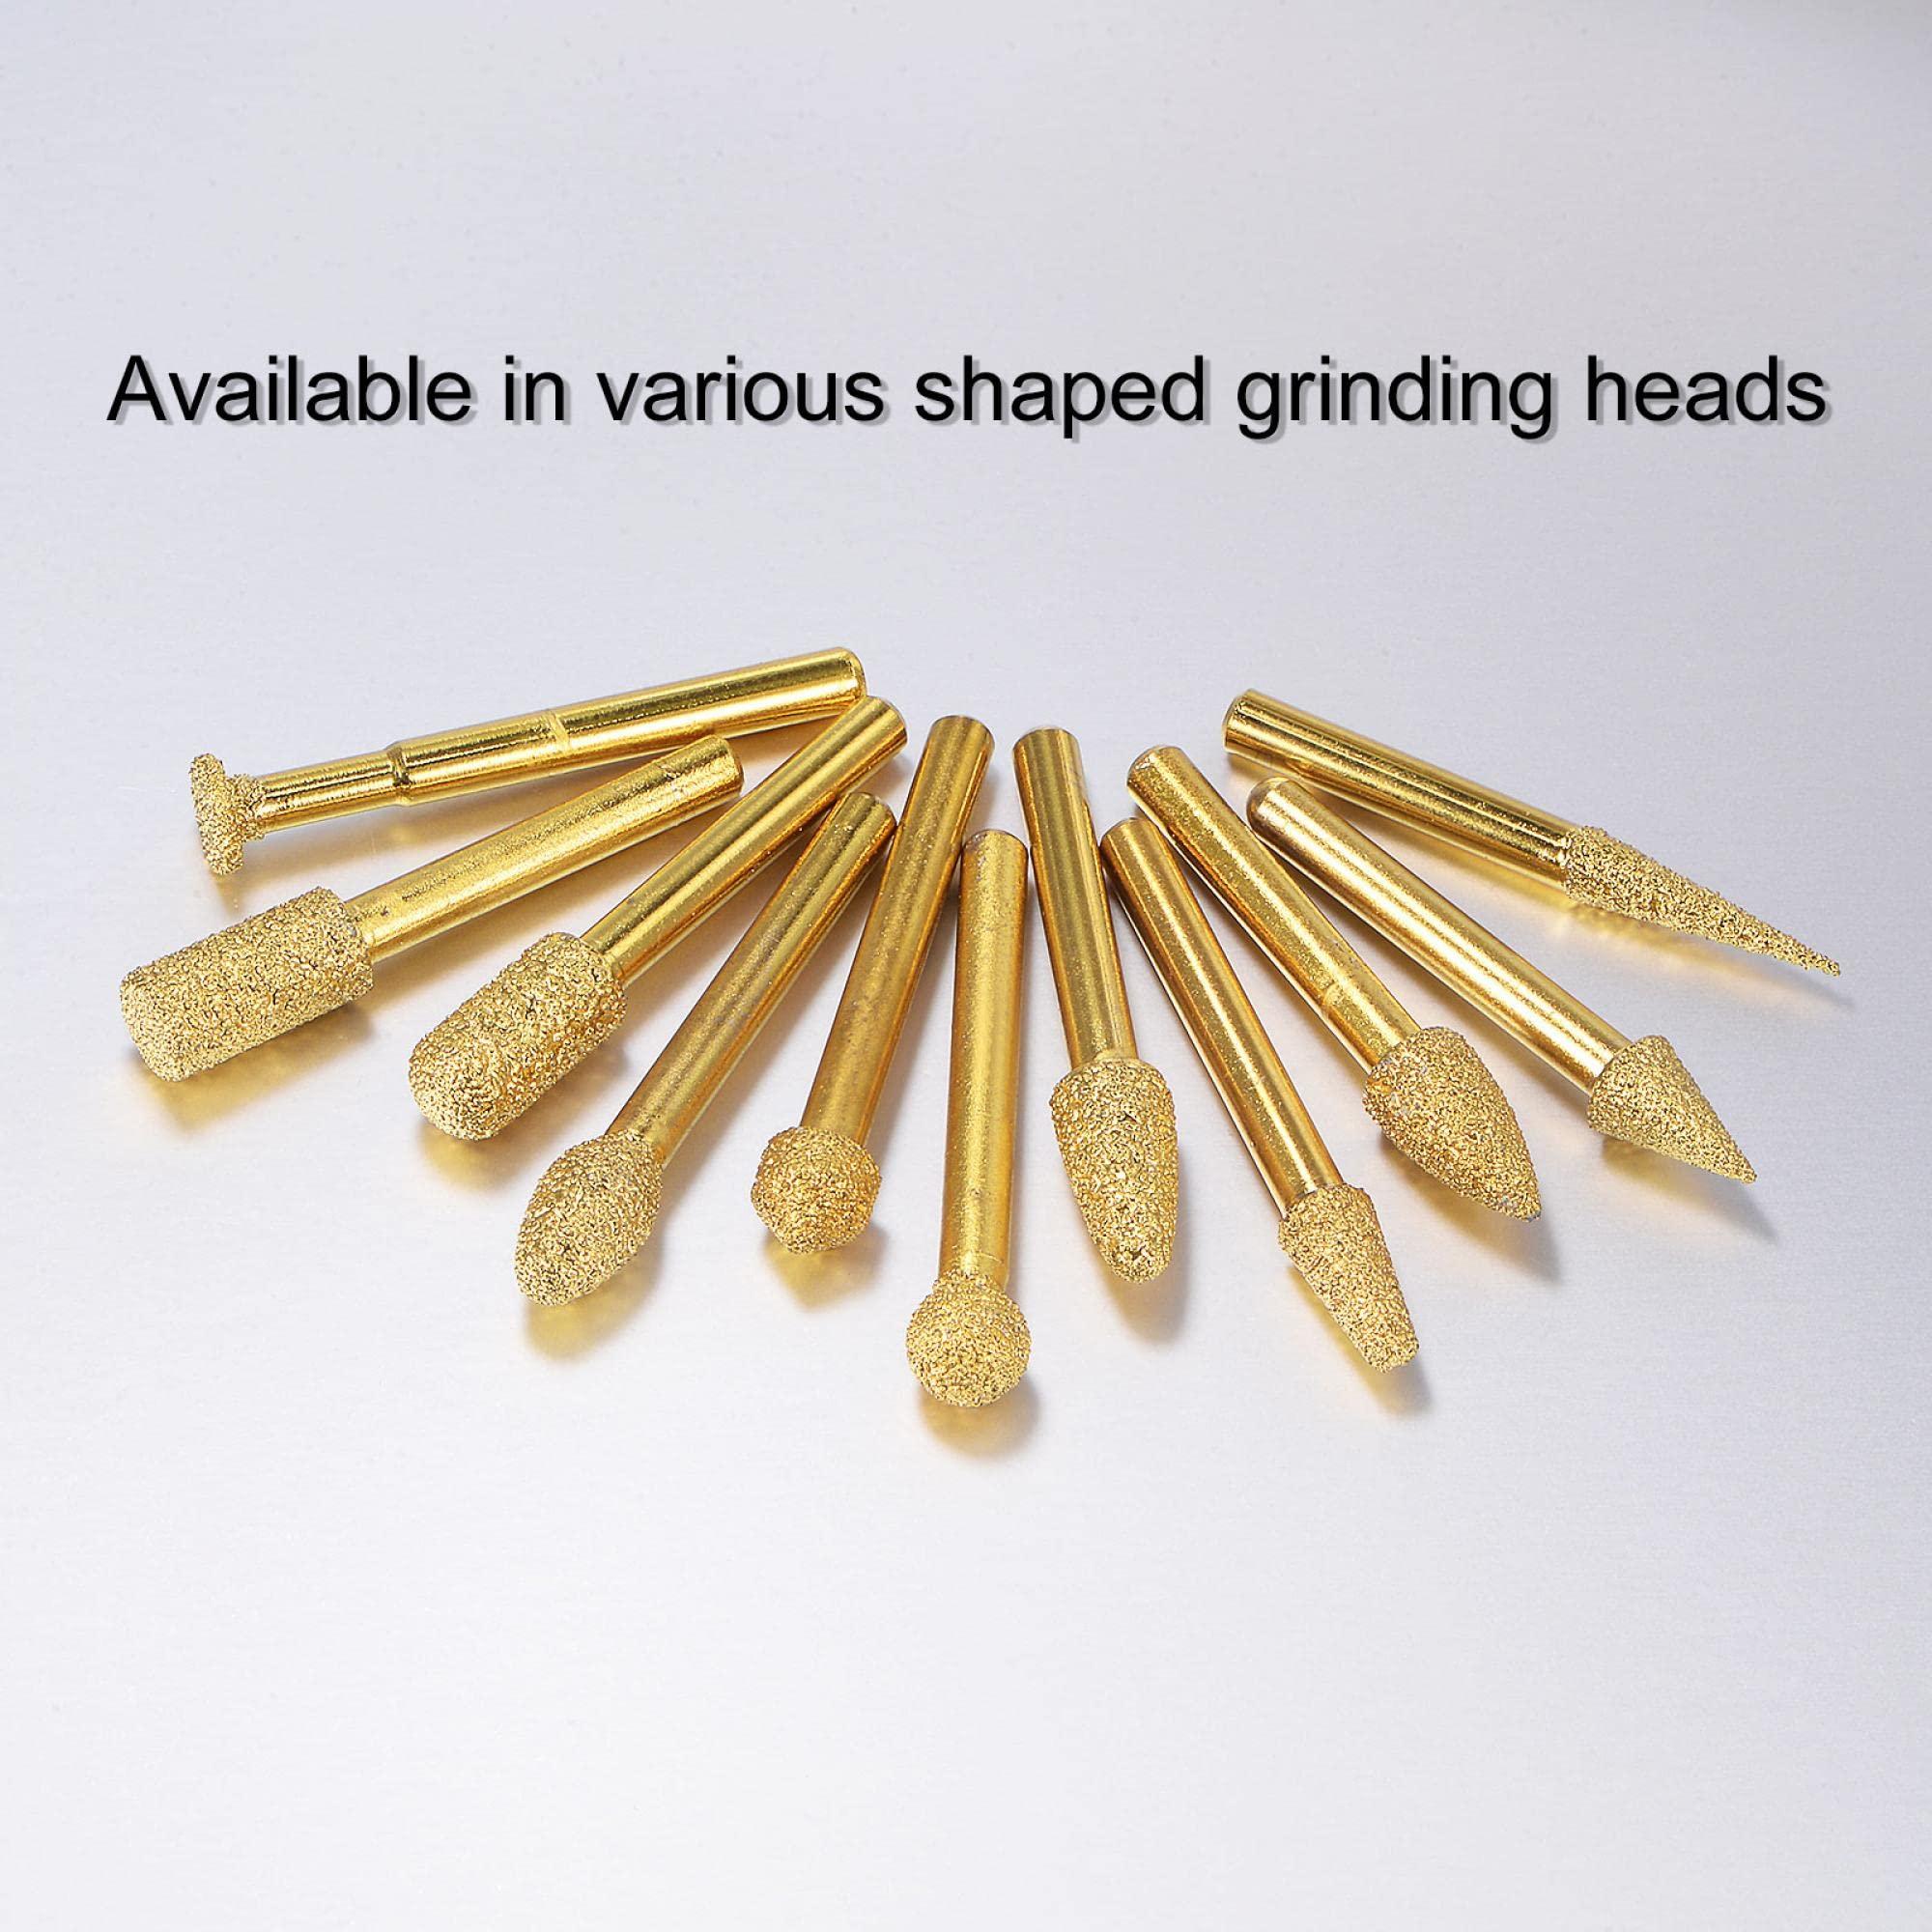 sourcing map 5Pcs Diamond Mounted Point 10mm Brazed Grinder Taper Head 6mm Shank Grinding Rotary Bit Marble Stone Carving Tool 4